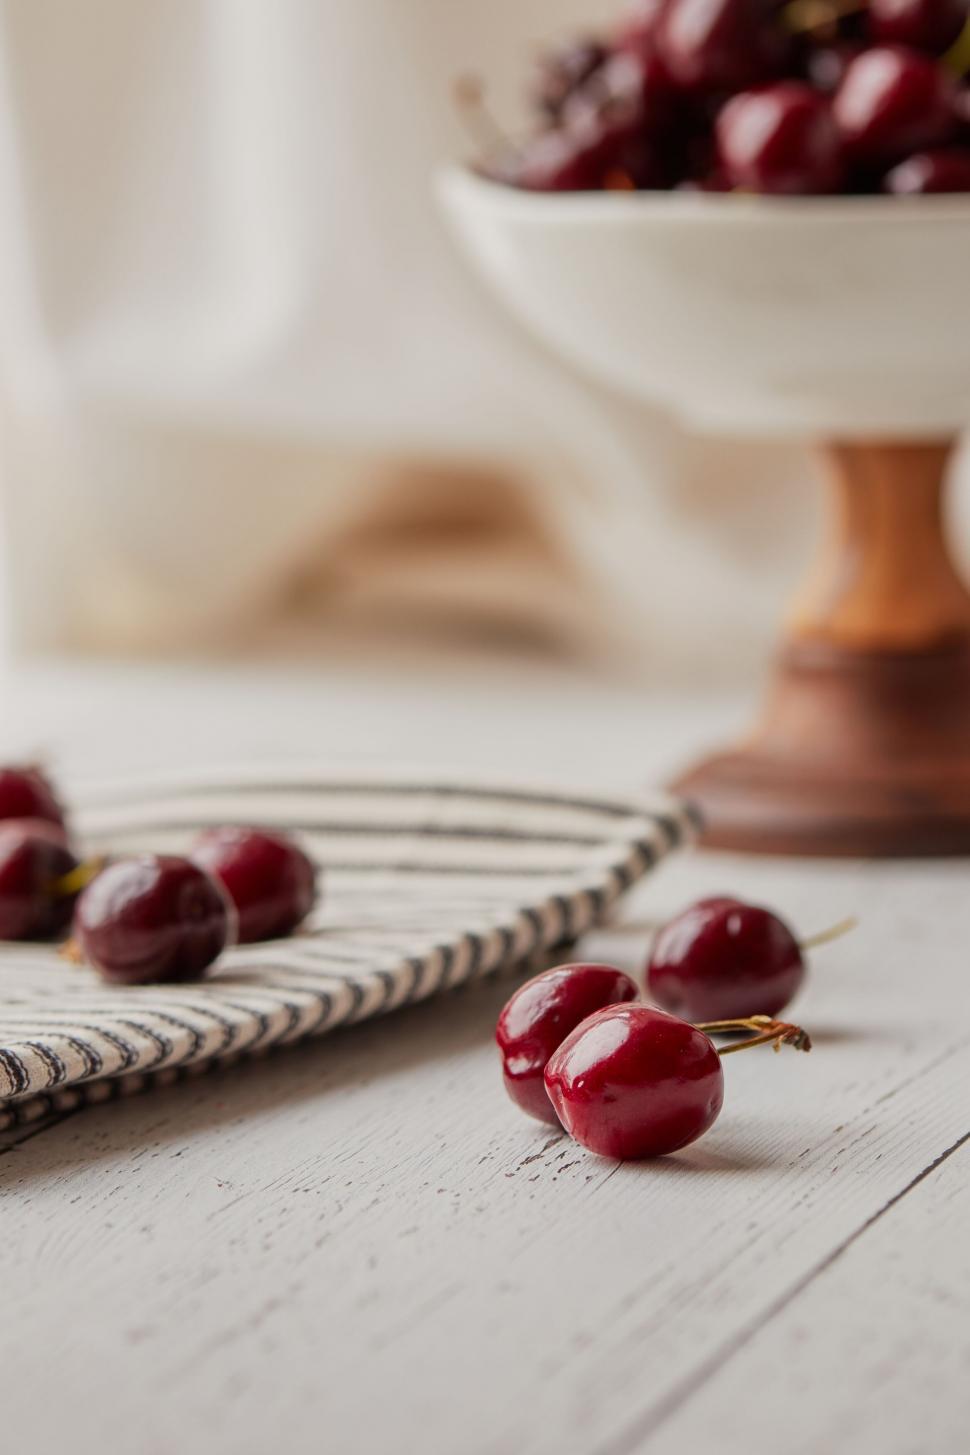 Free Image of Cherries scattered and bowl on white table 